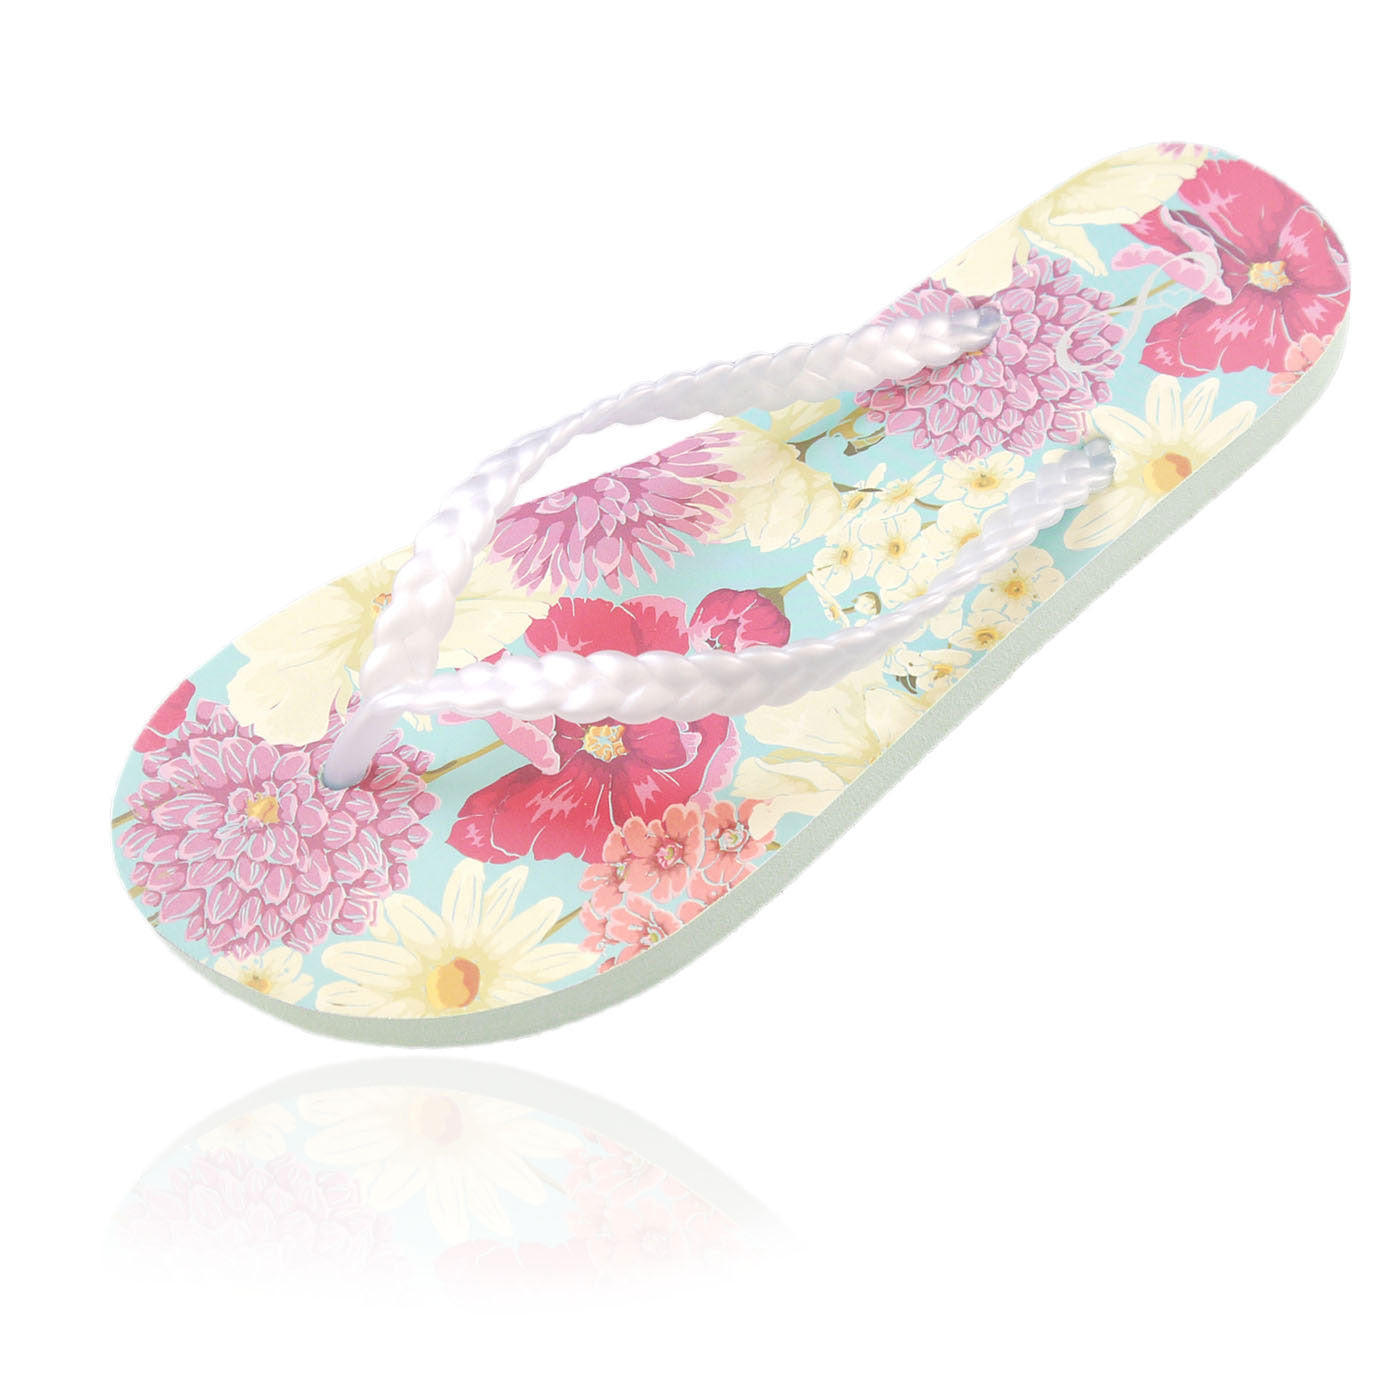 20 pairs of pastel flower flip flops in a personalized crate